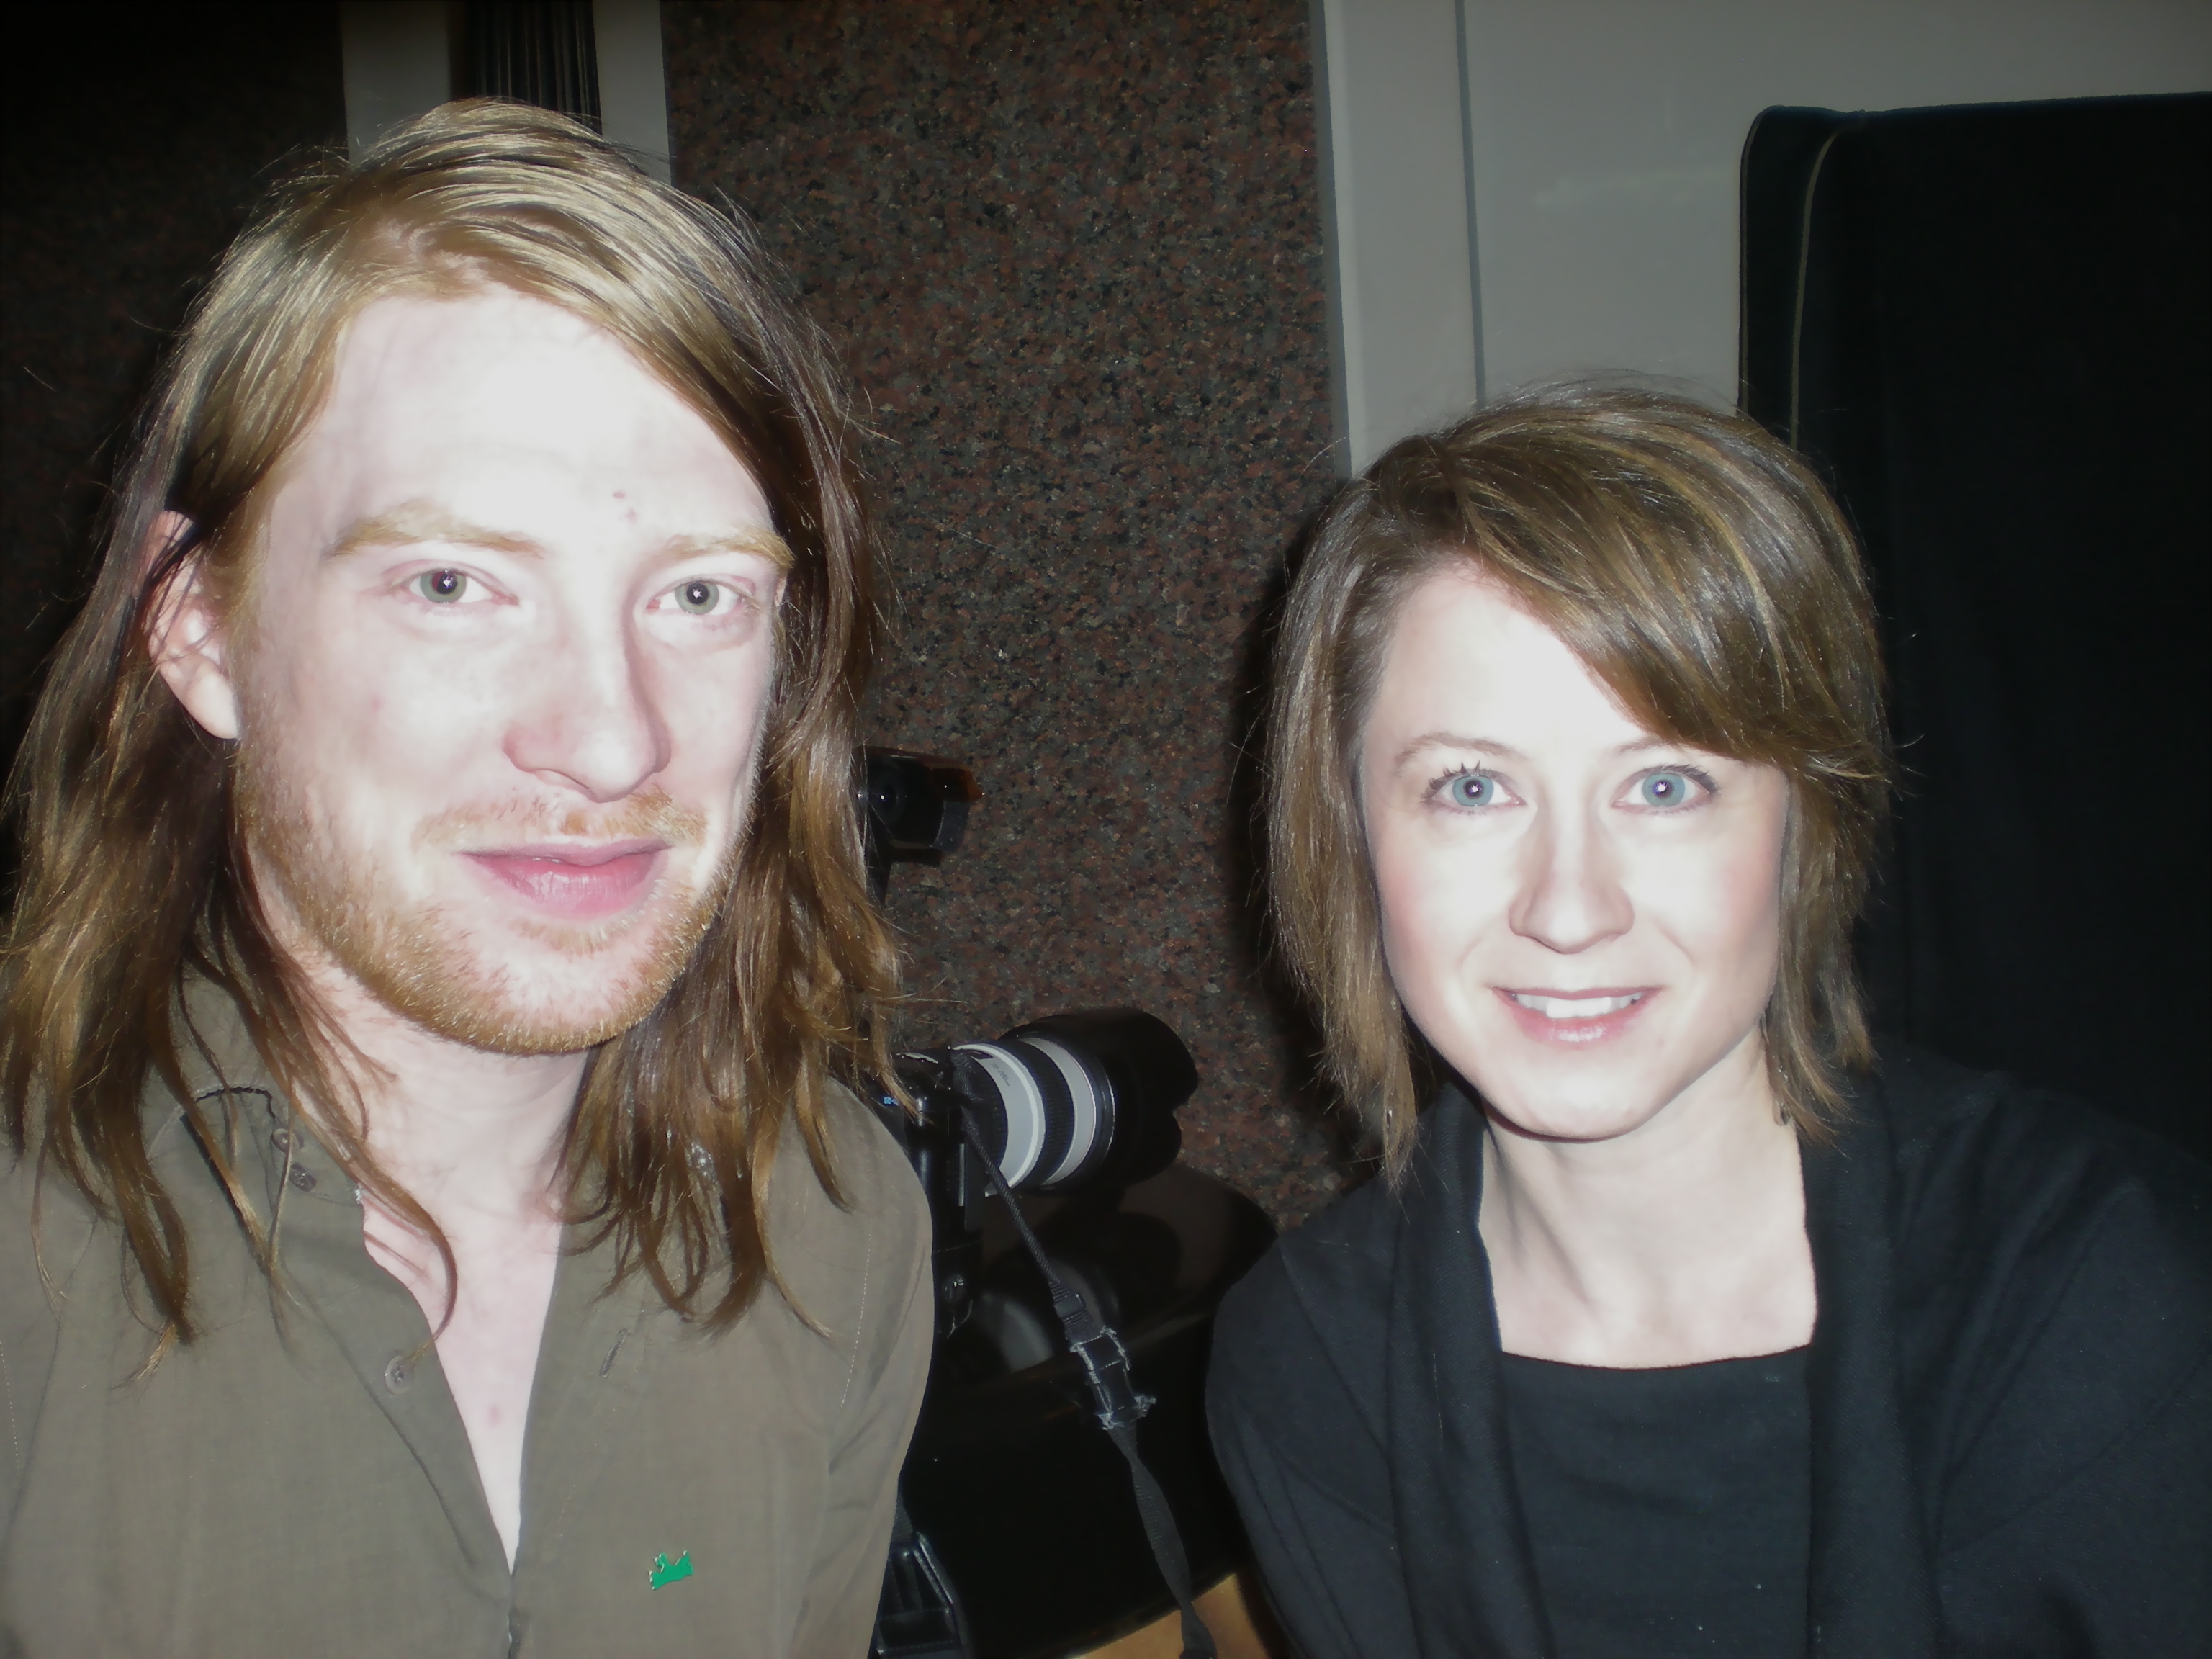 Domnhall Gleeson and Lana Veenker. EPF's Shooting Stars Meet With International Casting Directors, Berlinale, February 2011